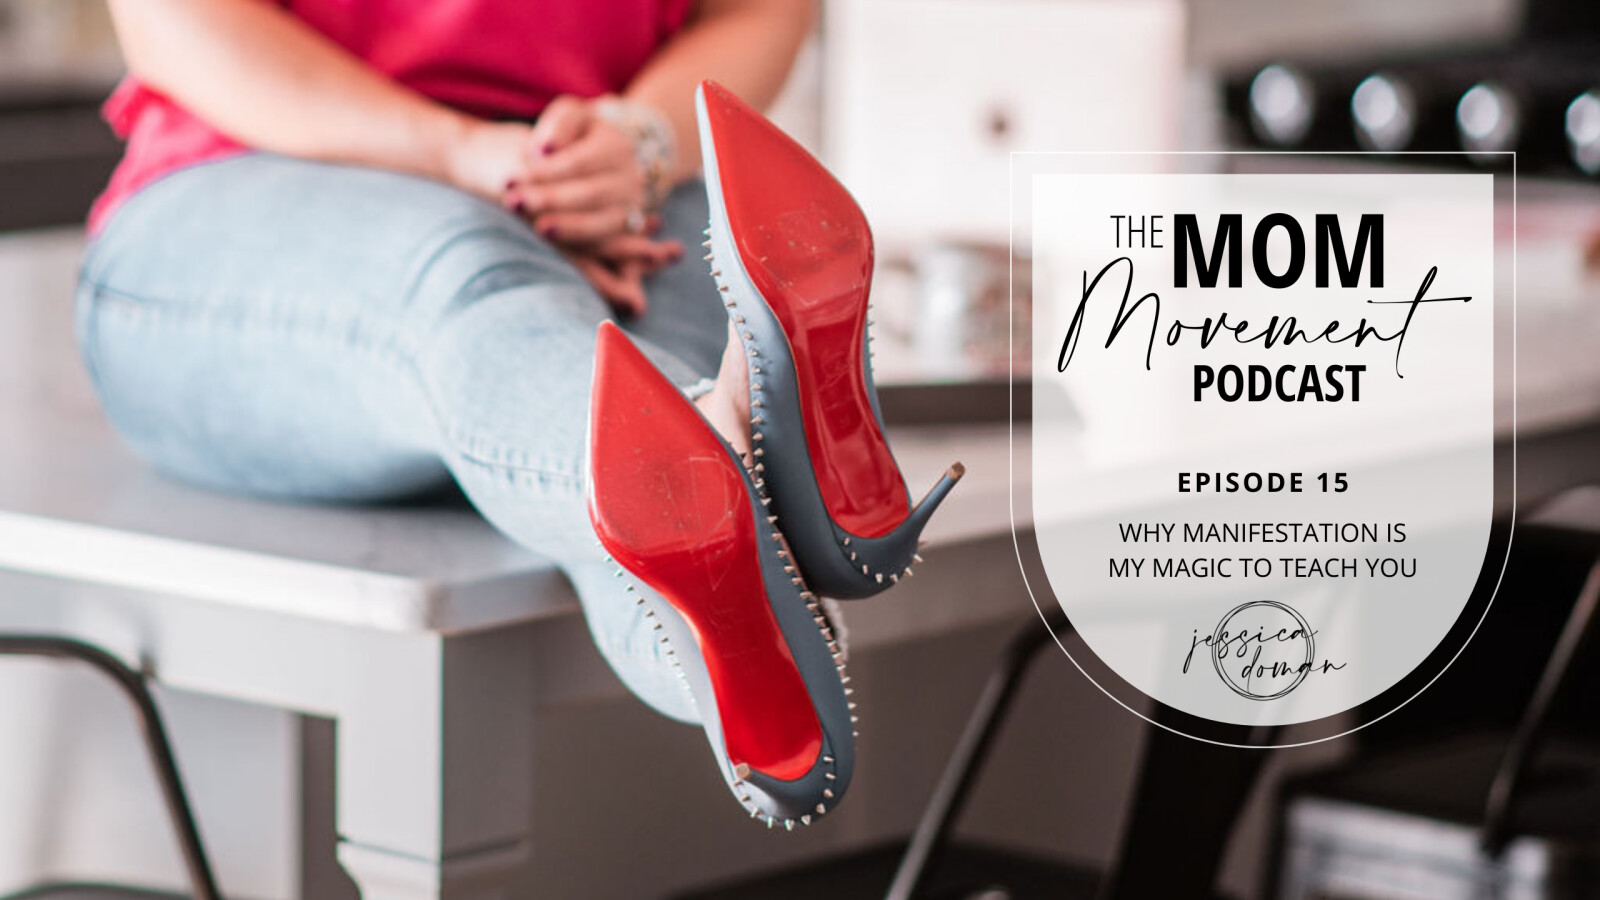 Podcast Episode #15: Why Manifestation Is My Magic To Teach You